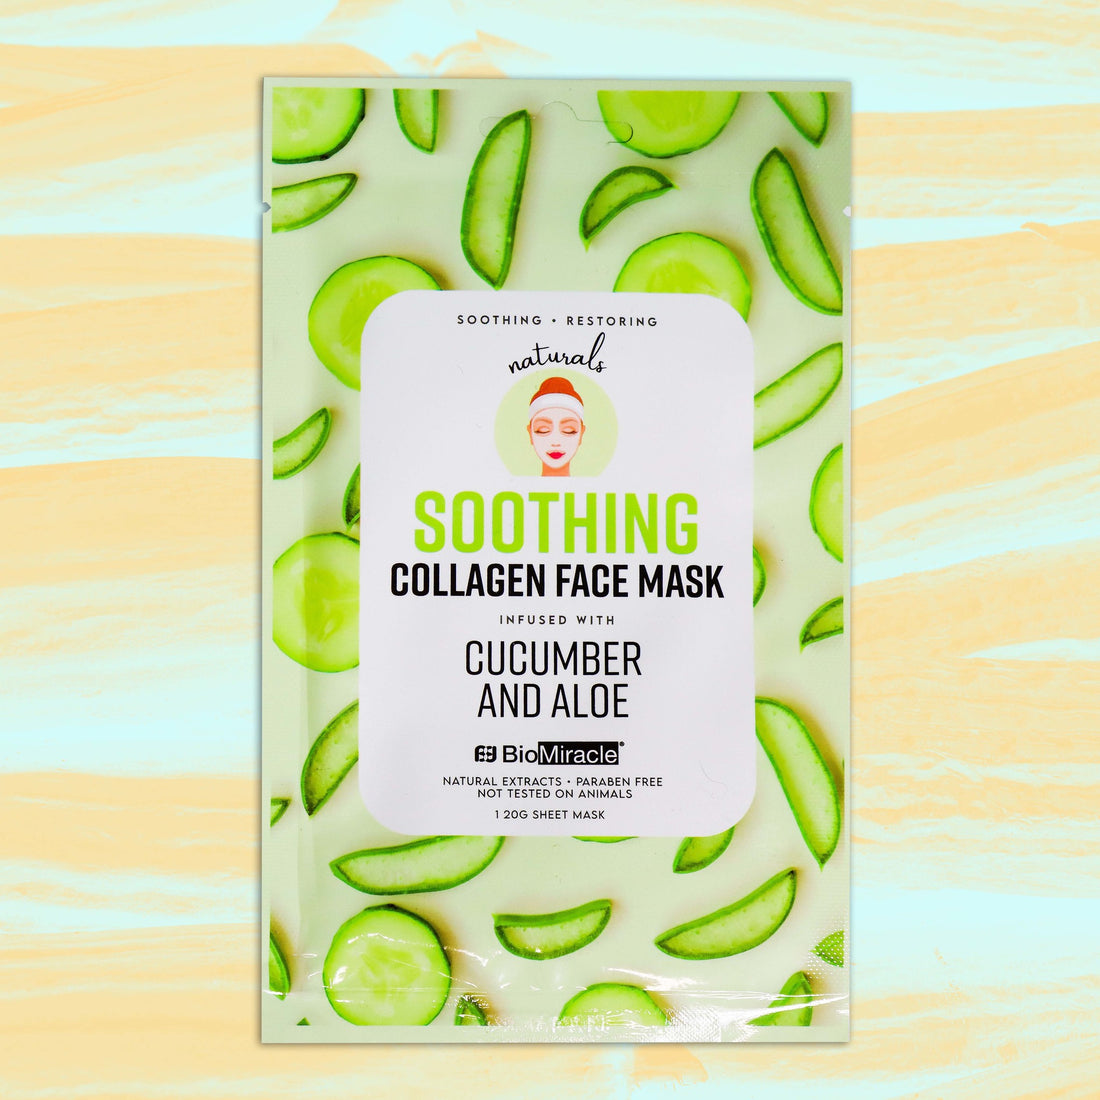  C'est Moi Soothing Cucumber & Aloe Gel Facial Mask  Soothe &  Hydrate Skin, Moisturizing Facial Mask, Clinically Tested Non-Toxic  Ingredients feat. Organic Aloe & Calendula, EWG Verified, 1.7 oz 